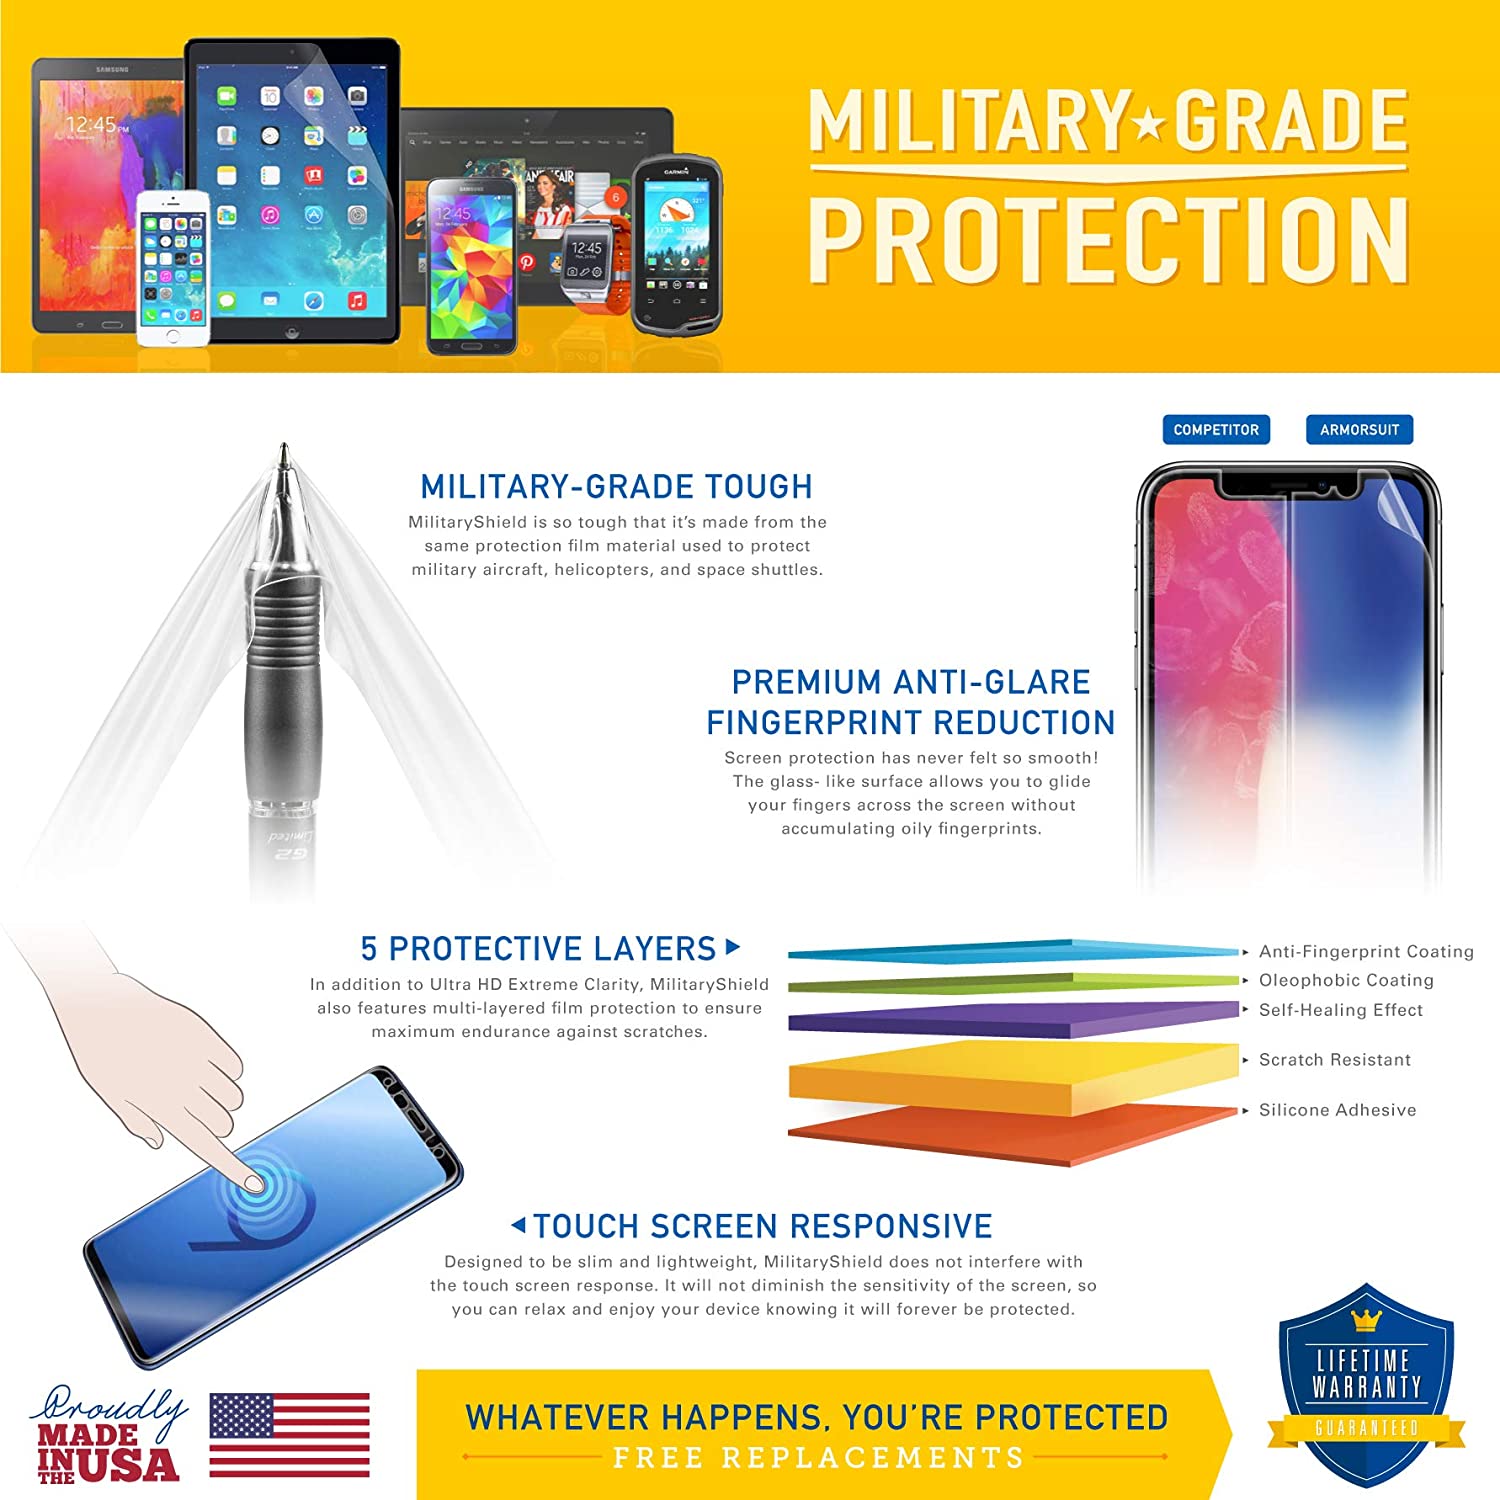 [2-Pack] Samsung Galaxy S3 Screen Protector